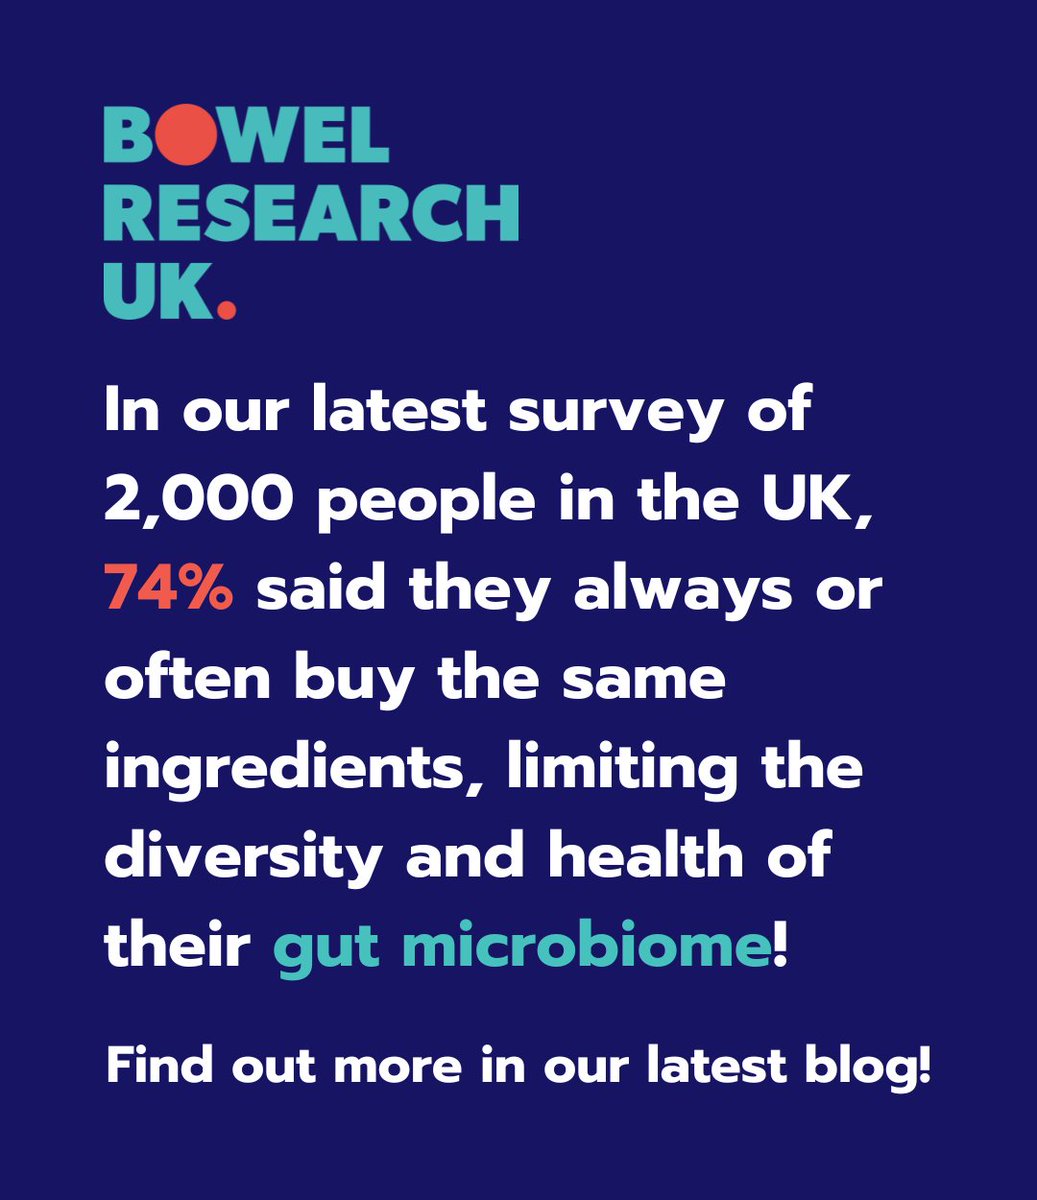 Learn how to easily and affordably diversify your diet to benefit your gut microbiome by reading our latest blog post > bowelresearchuk.org/latest-news/di…

#GutMicrobiome #Microbiome #BowelResearch #Bowels #BowelHealth #Diet